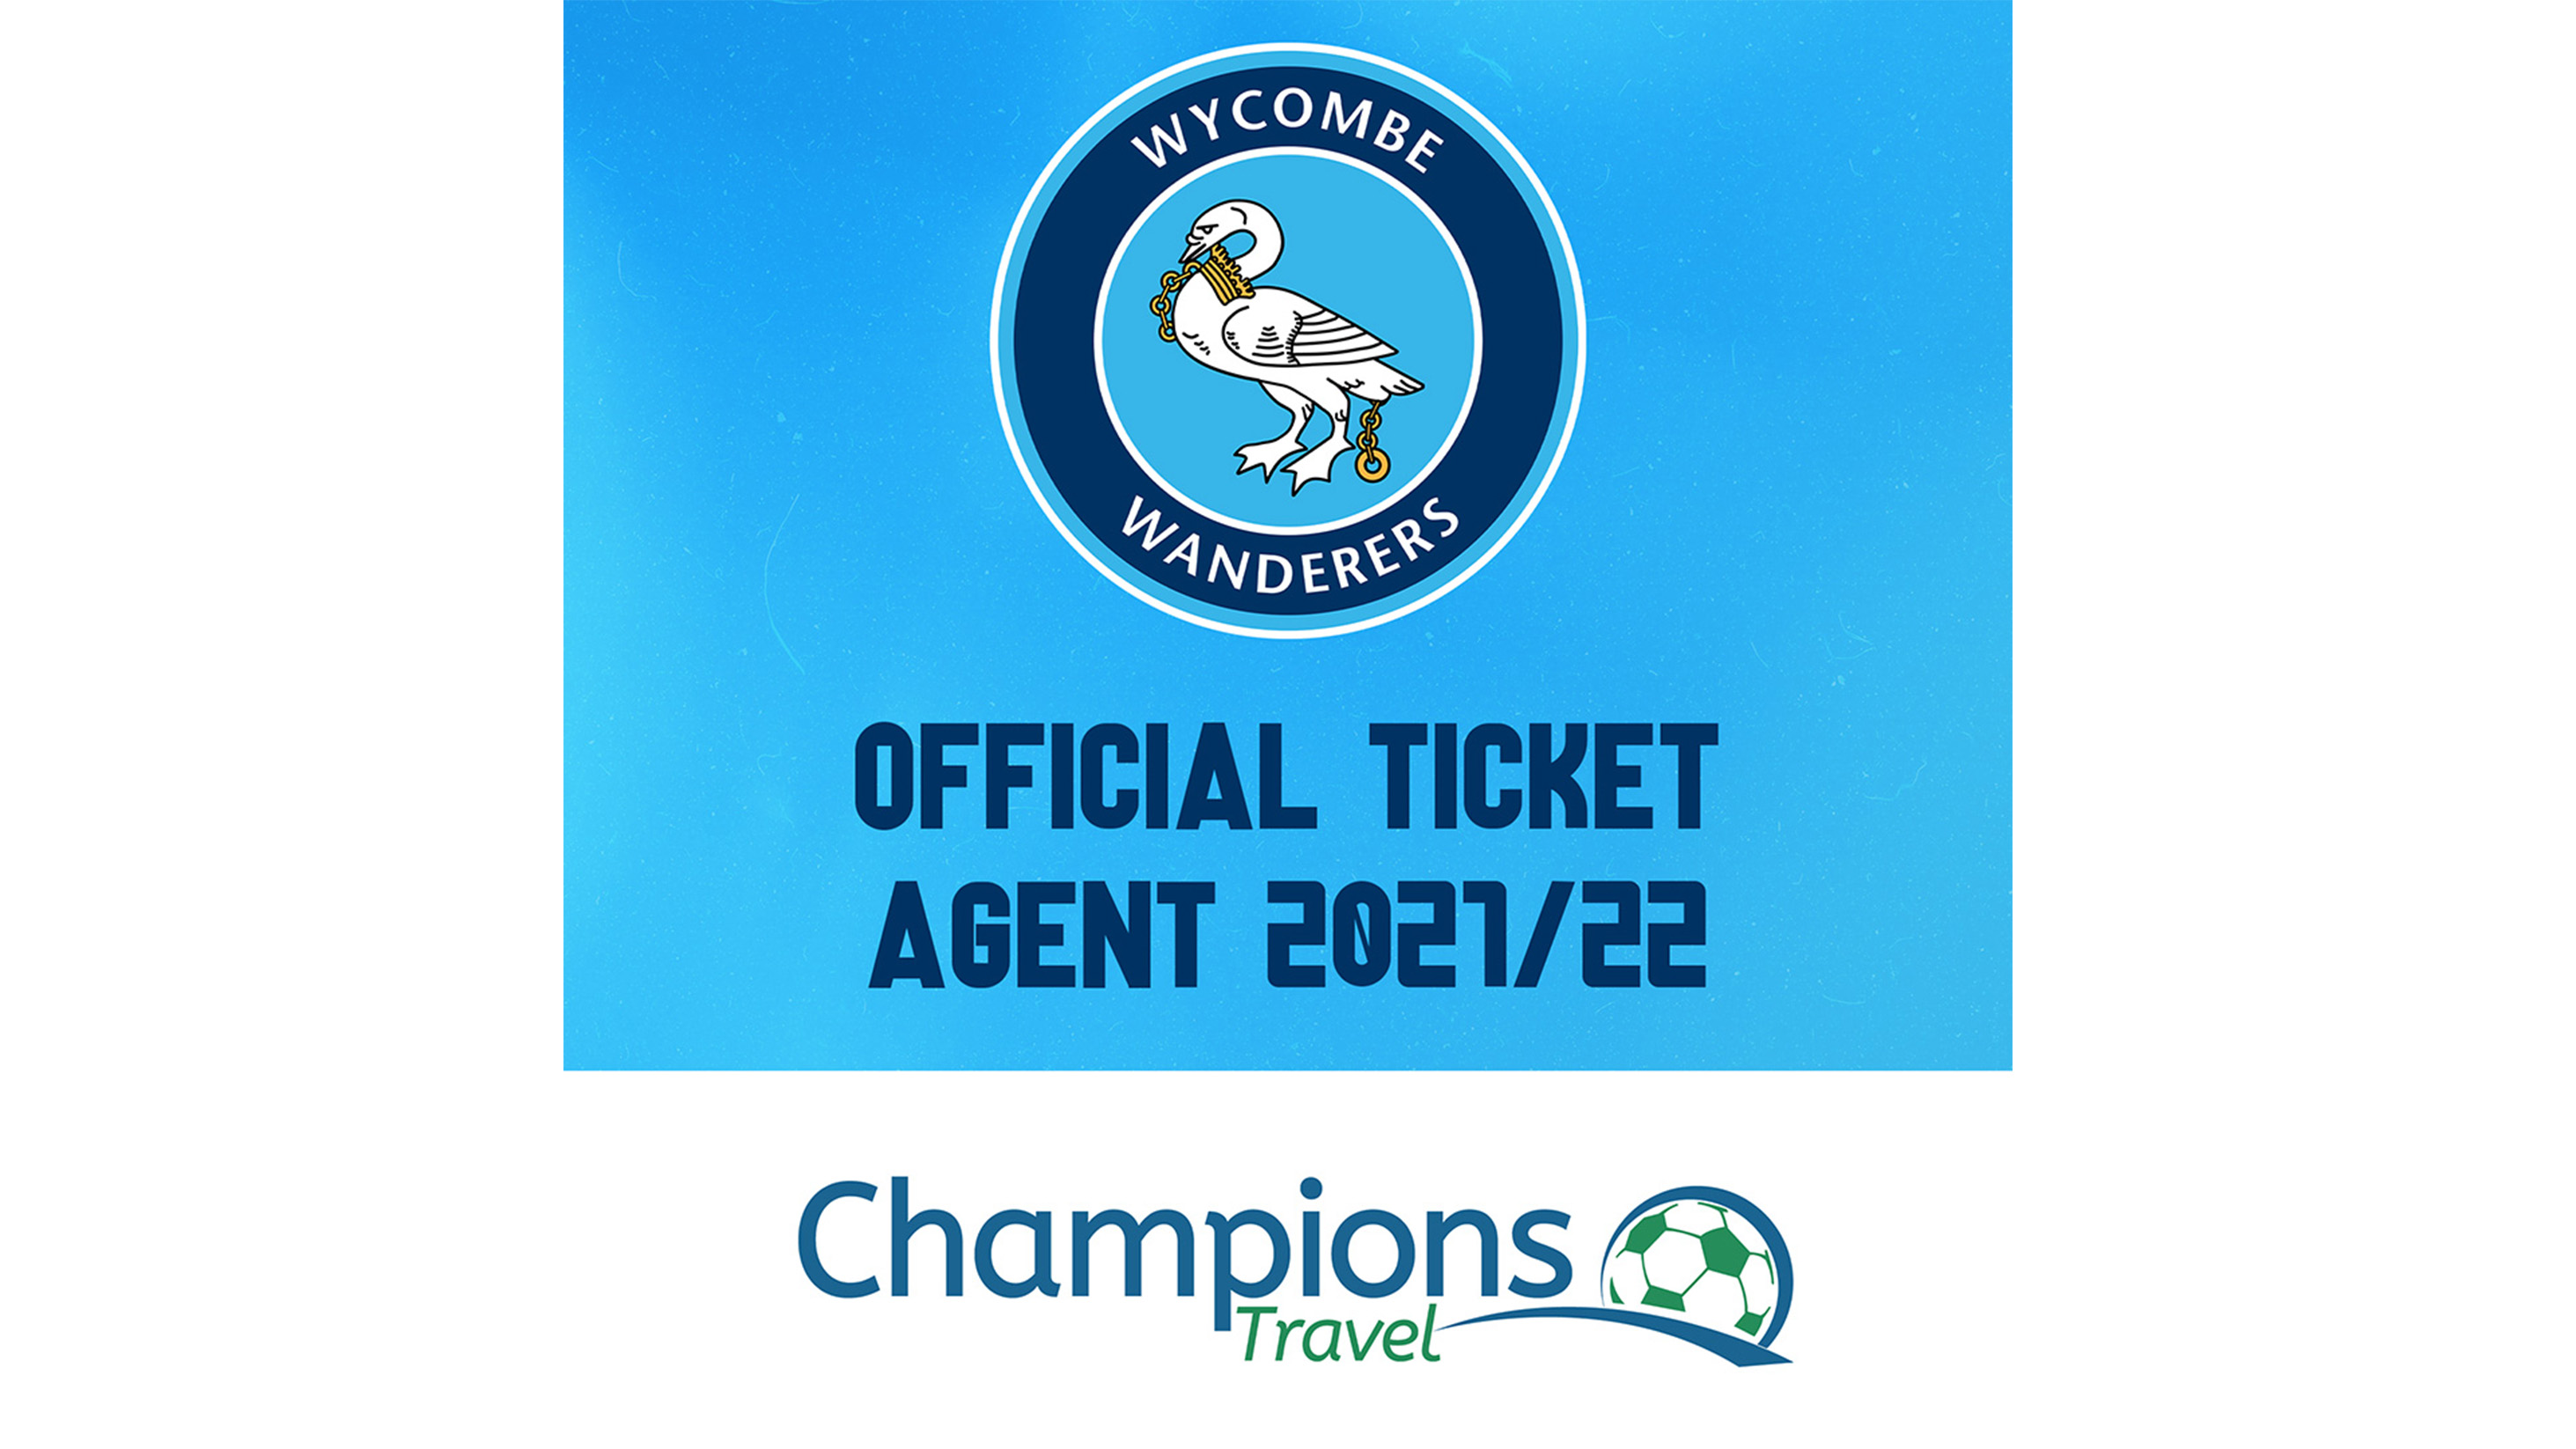 Official Ticket Agent for Wycombe Wanderers